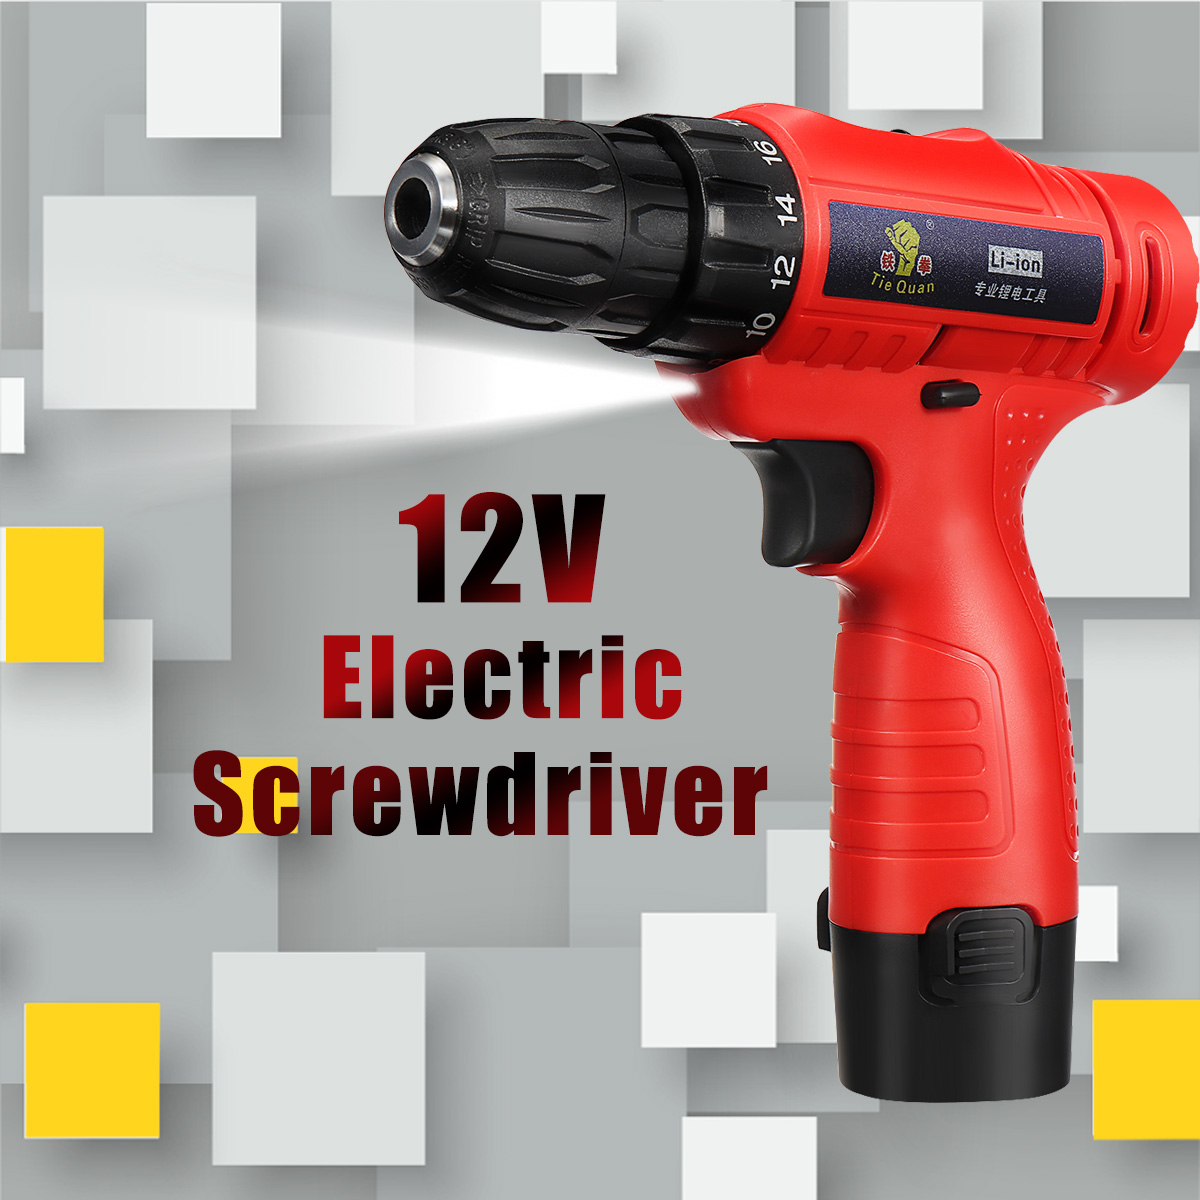 110V-240V-Cordless-Electric-Screwdriver-1-Battery-1-Charger-Drilling-Punching-Power-Tools-1287724-2